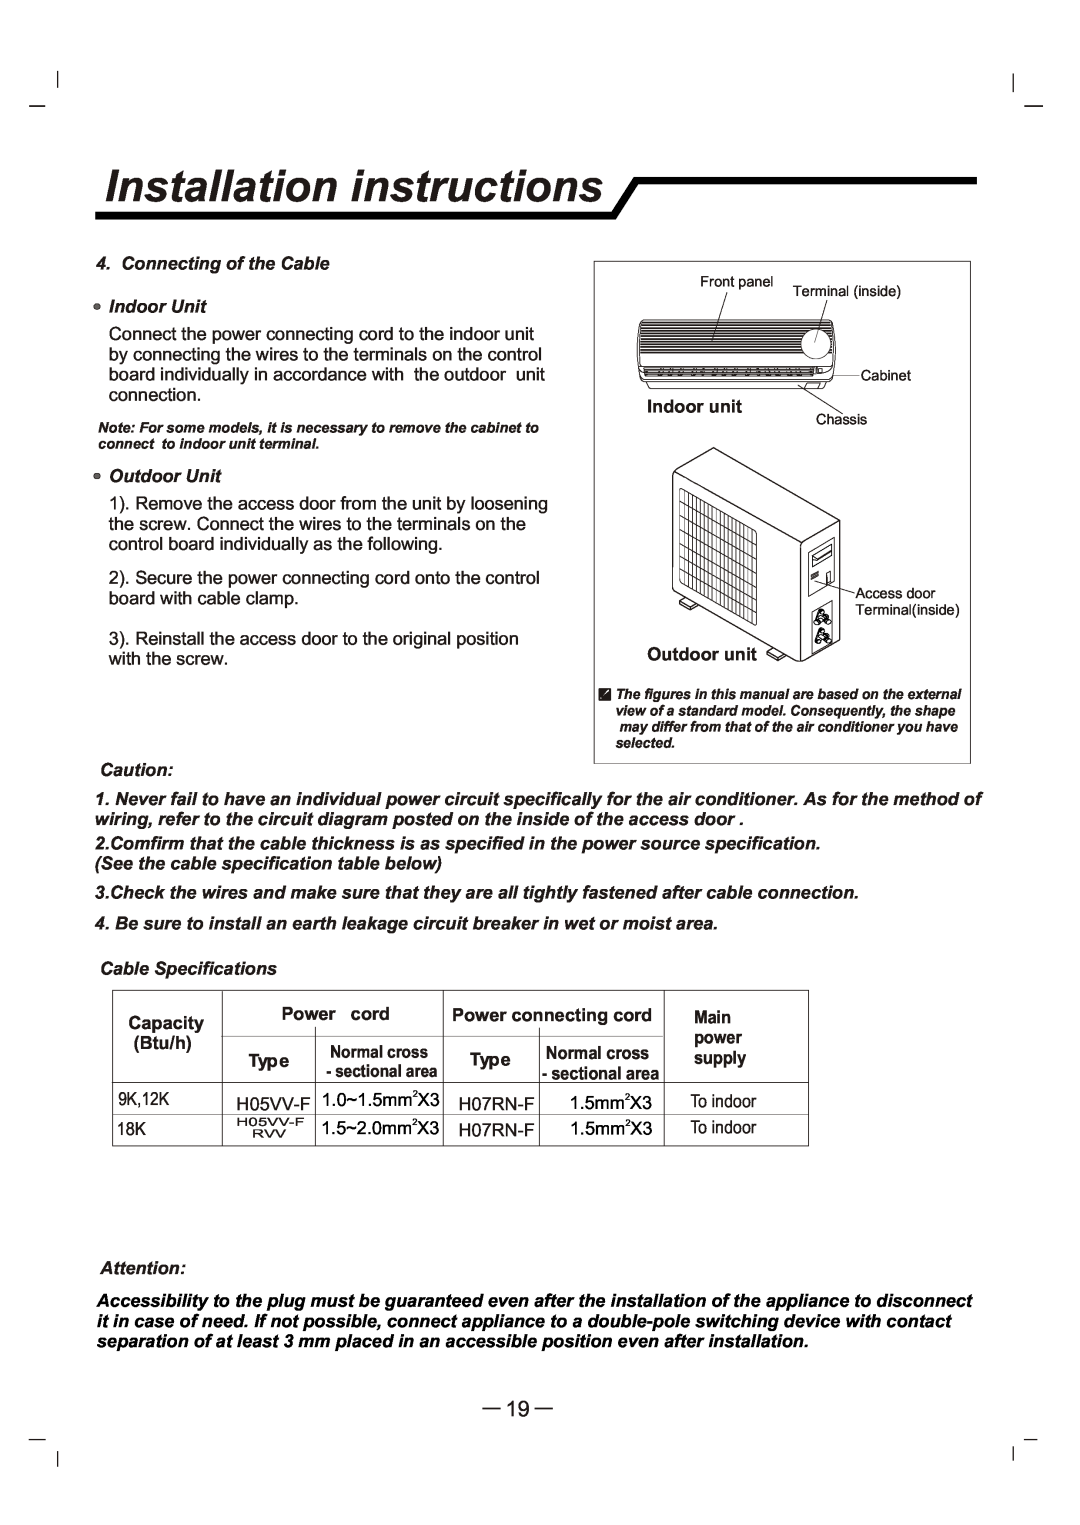 Whirlpool AS12 manual Installation instructions, Connecting of the Cable Indoor Unit, Outdoor Unit, Cable Specifications 